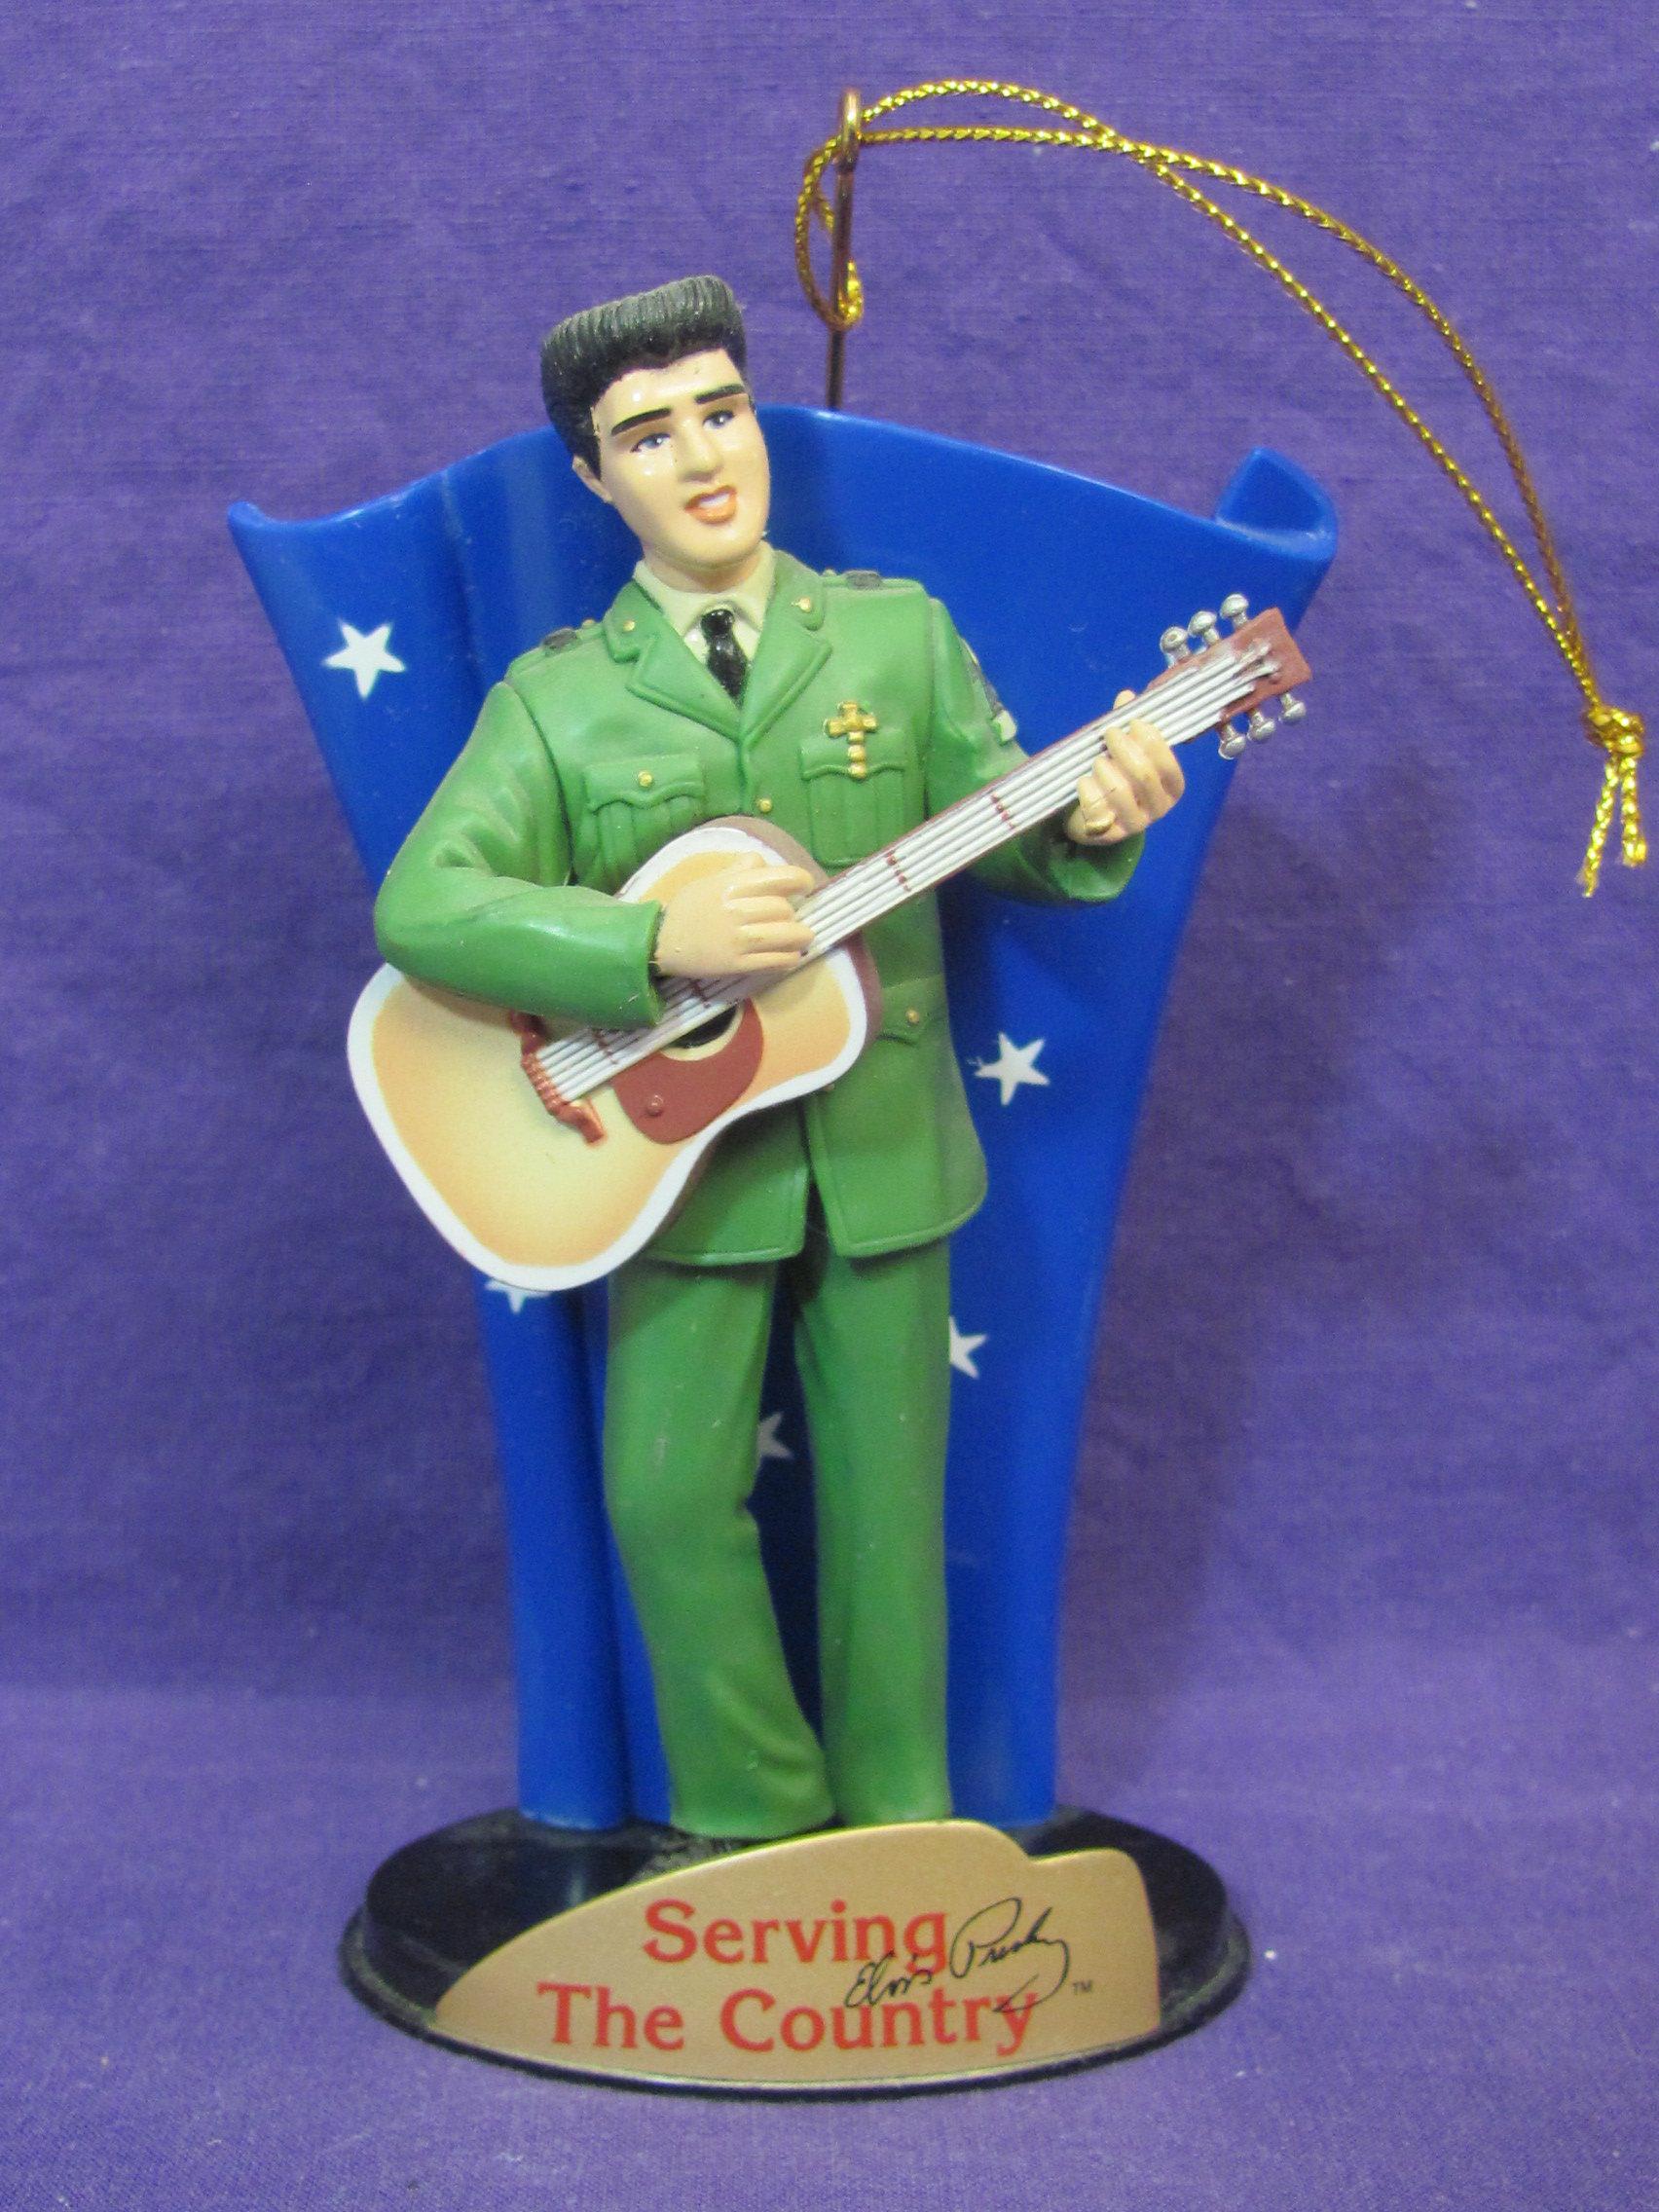 3 Elvis Presley Resin Ornaments – Serving the Country – Live in Las Vegas – About 4” tall